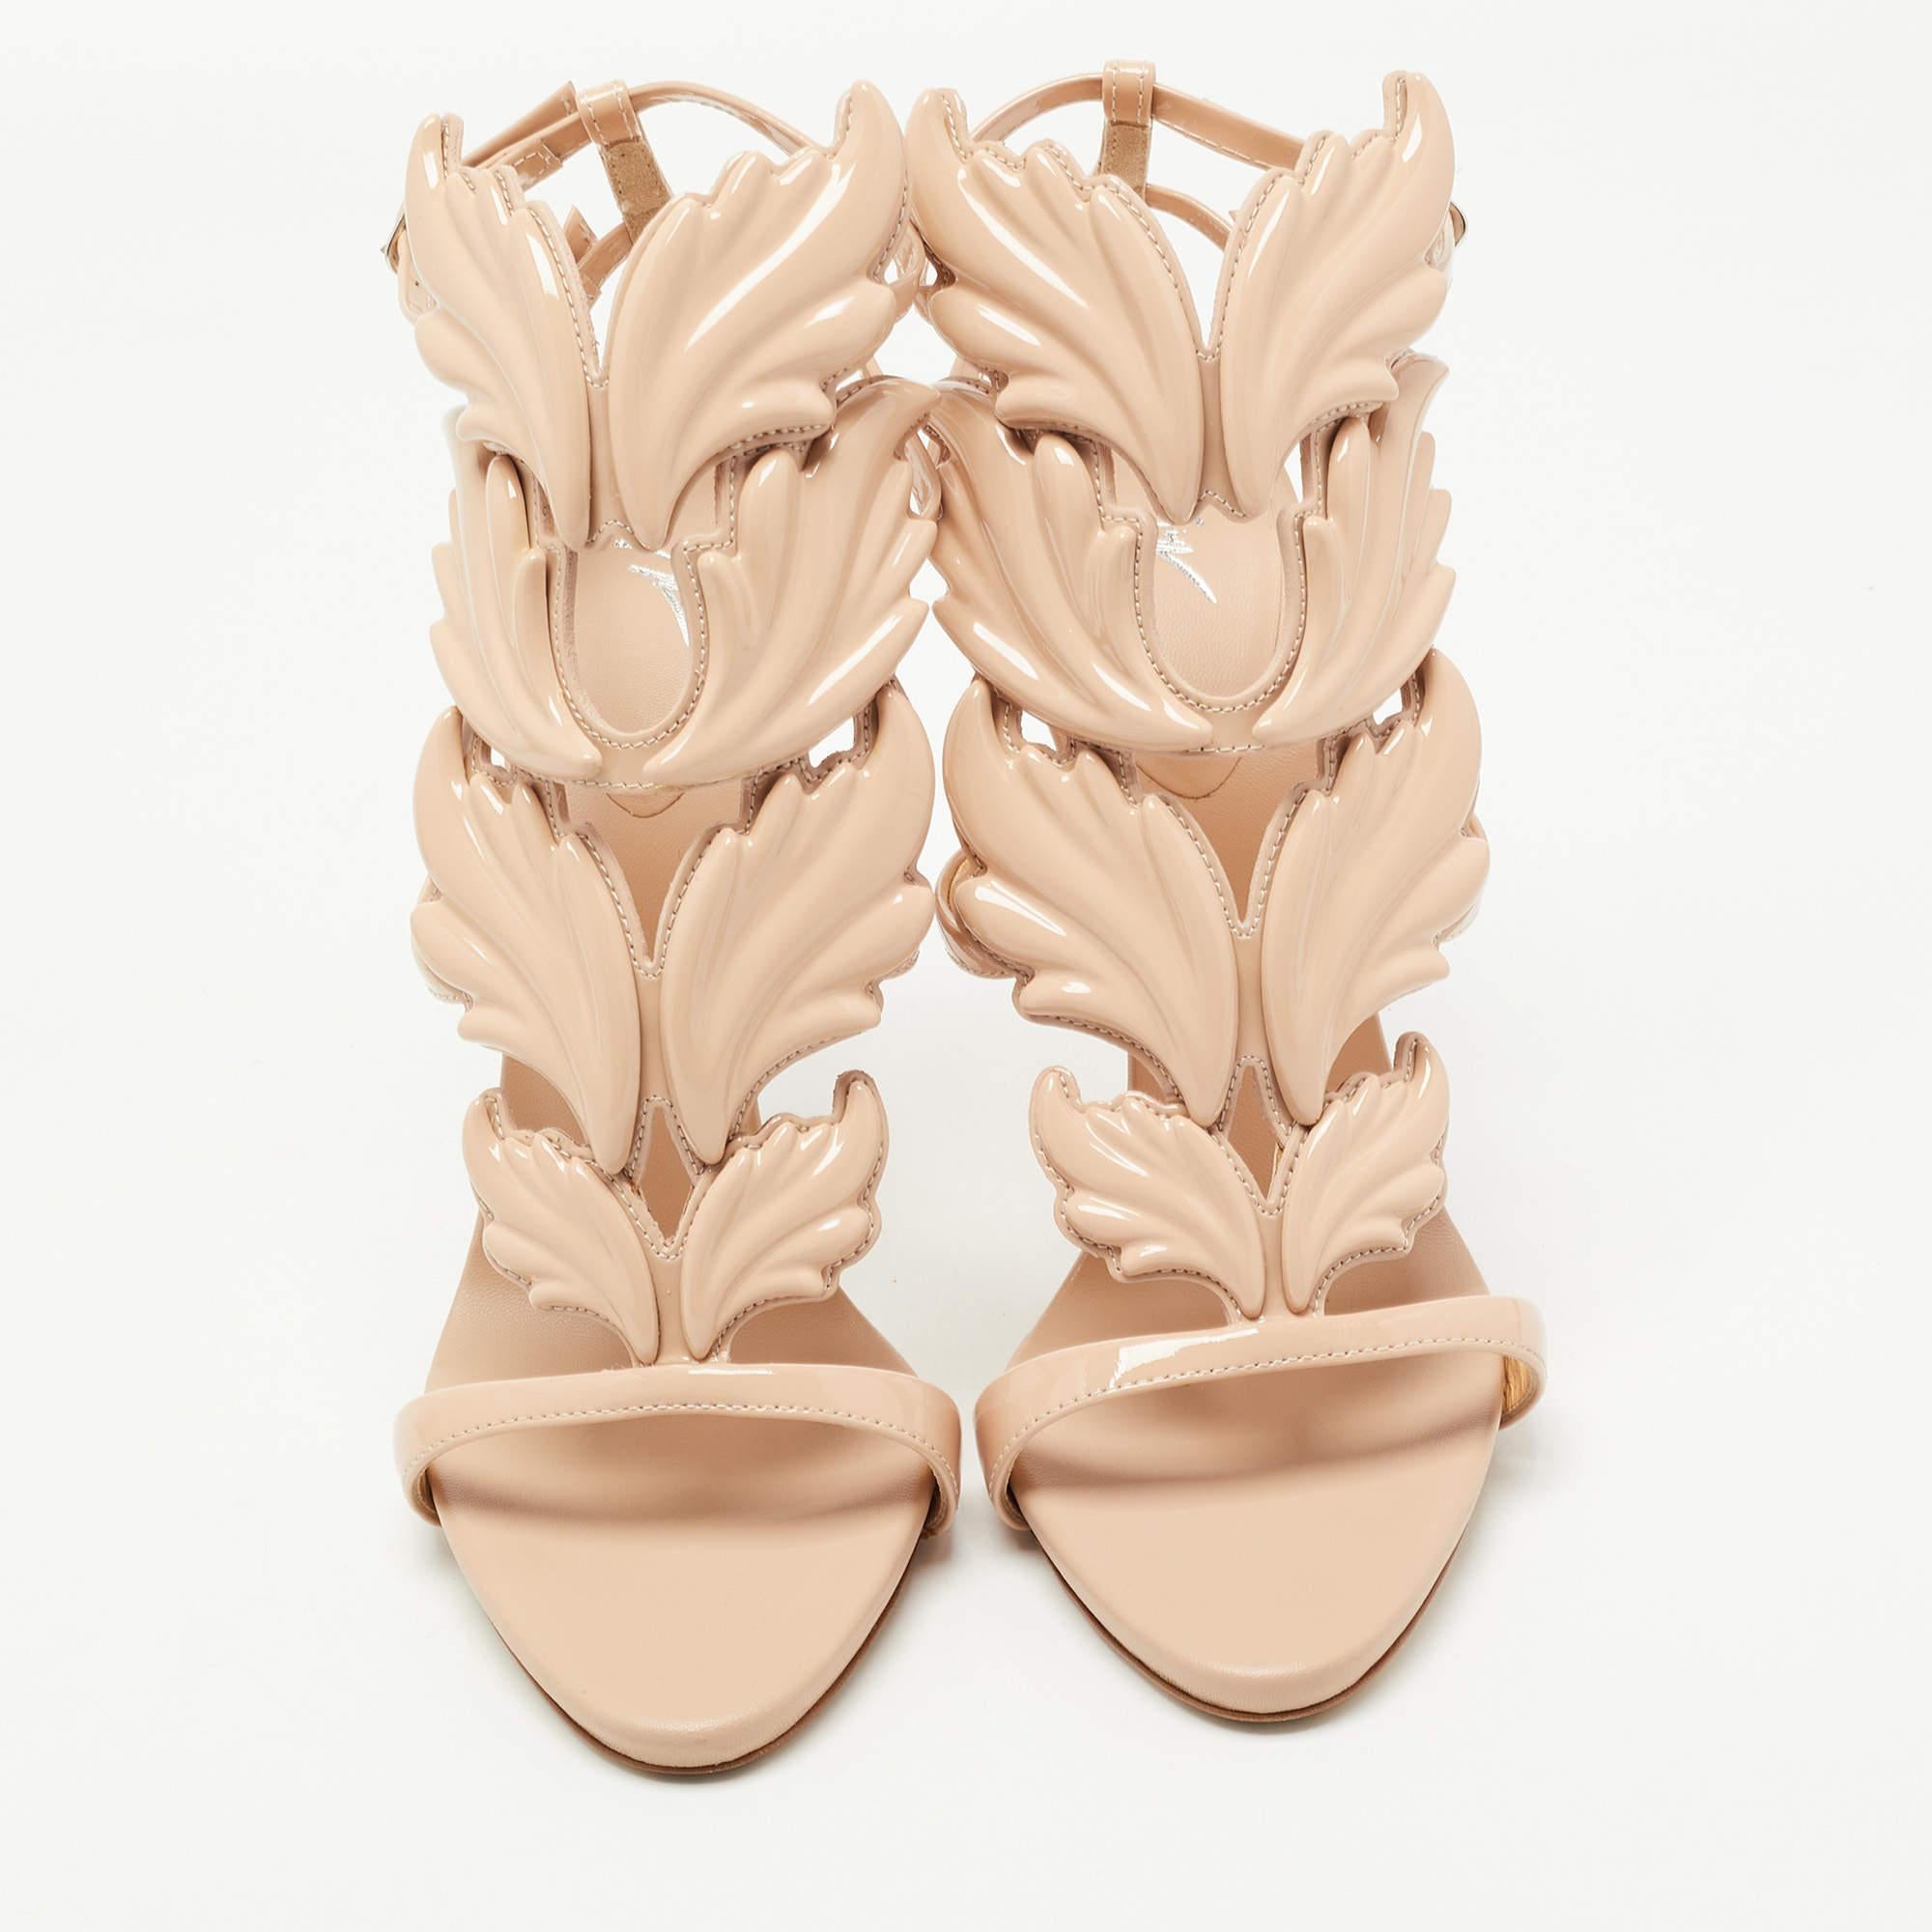 Giuseppe Zanott's Cruel sandals are all about making a statement with your fashion. These in peach are made using patent leather, and they feature the signature wings on the front.

Includes: Original Dustbag, Original Box

